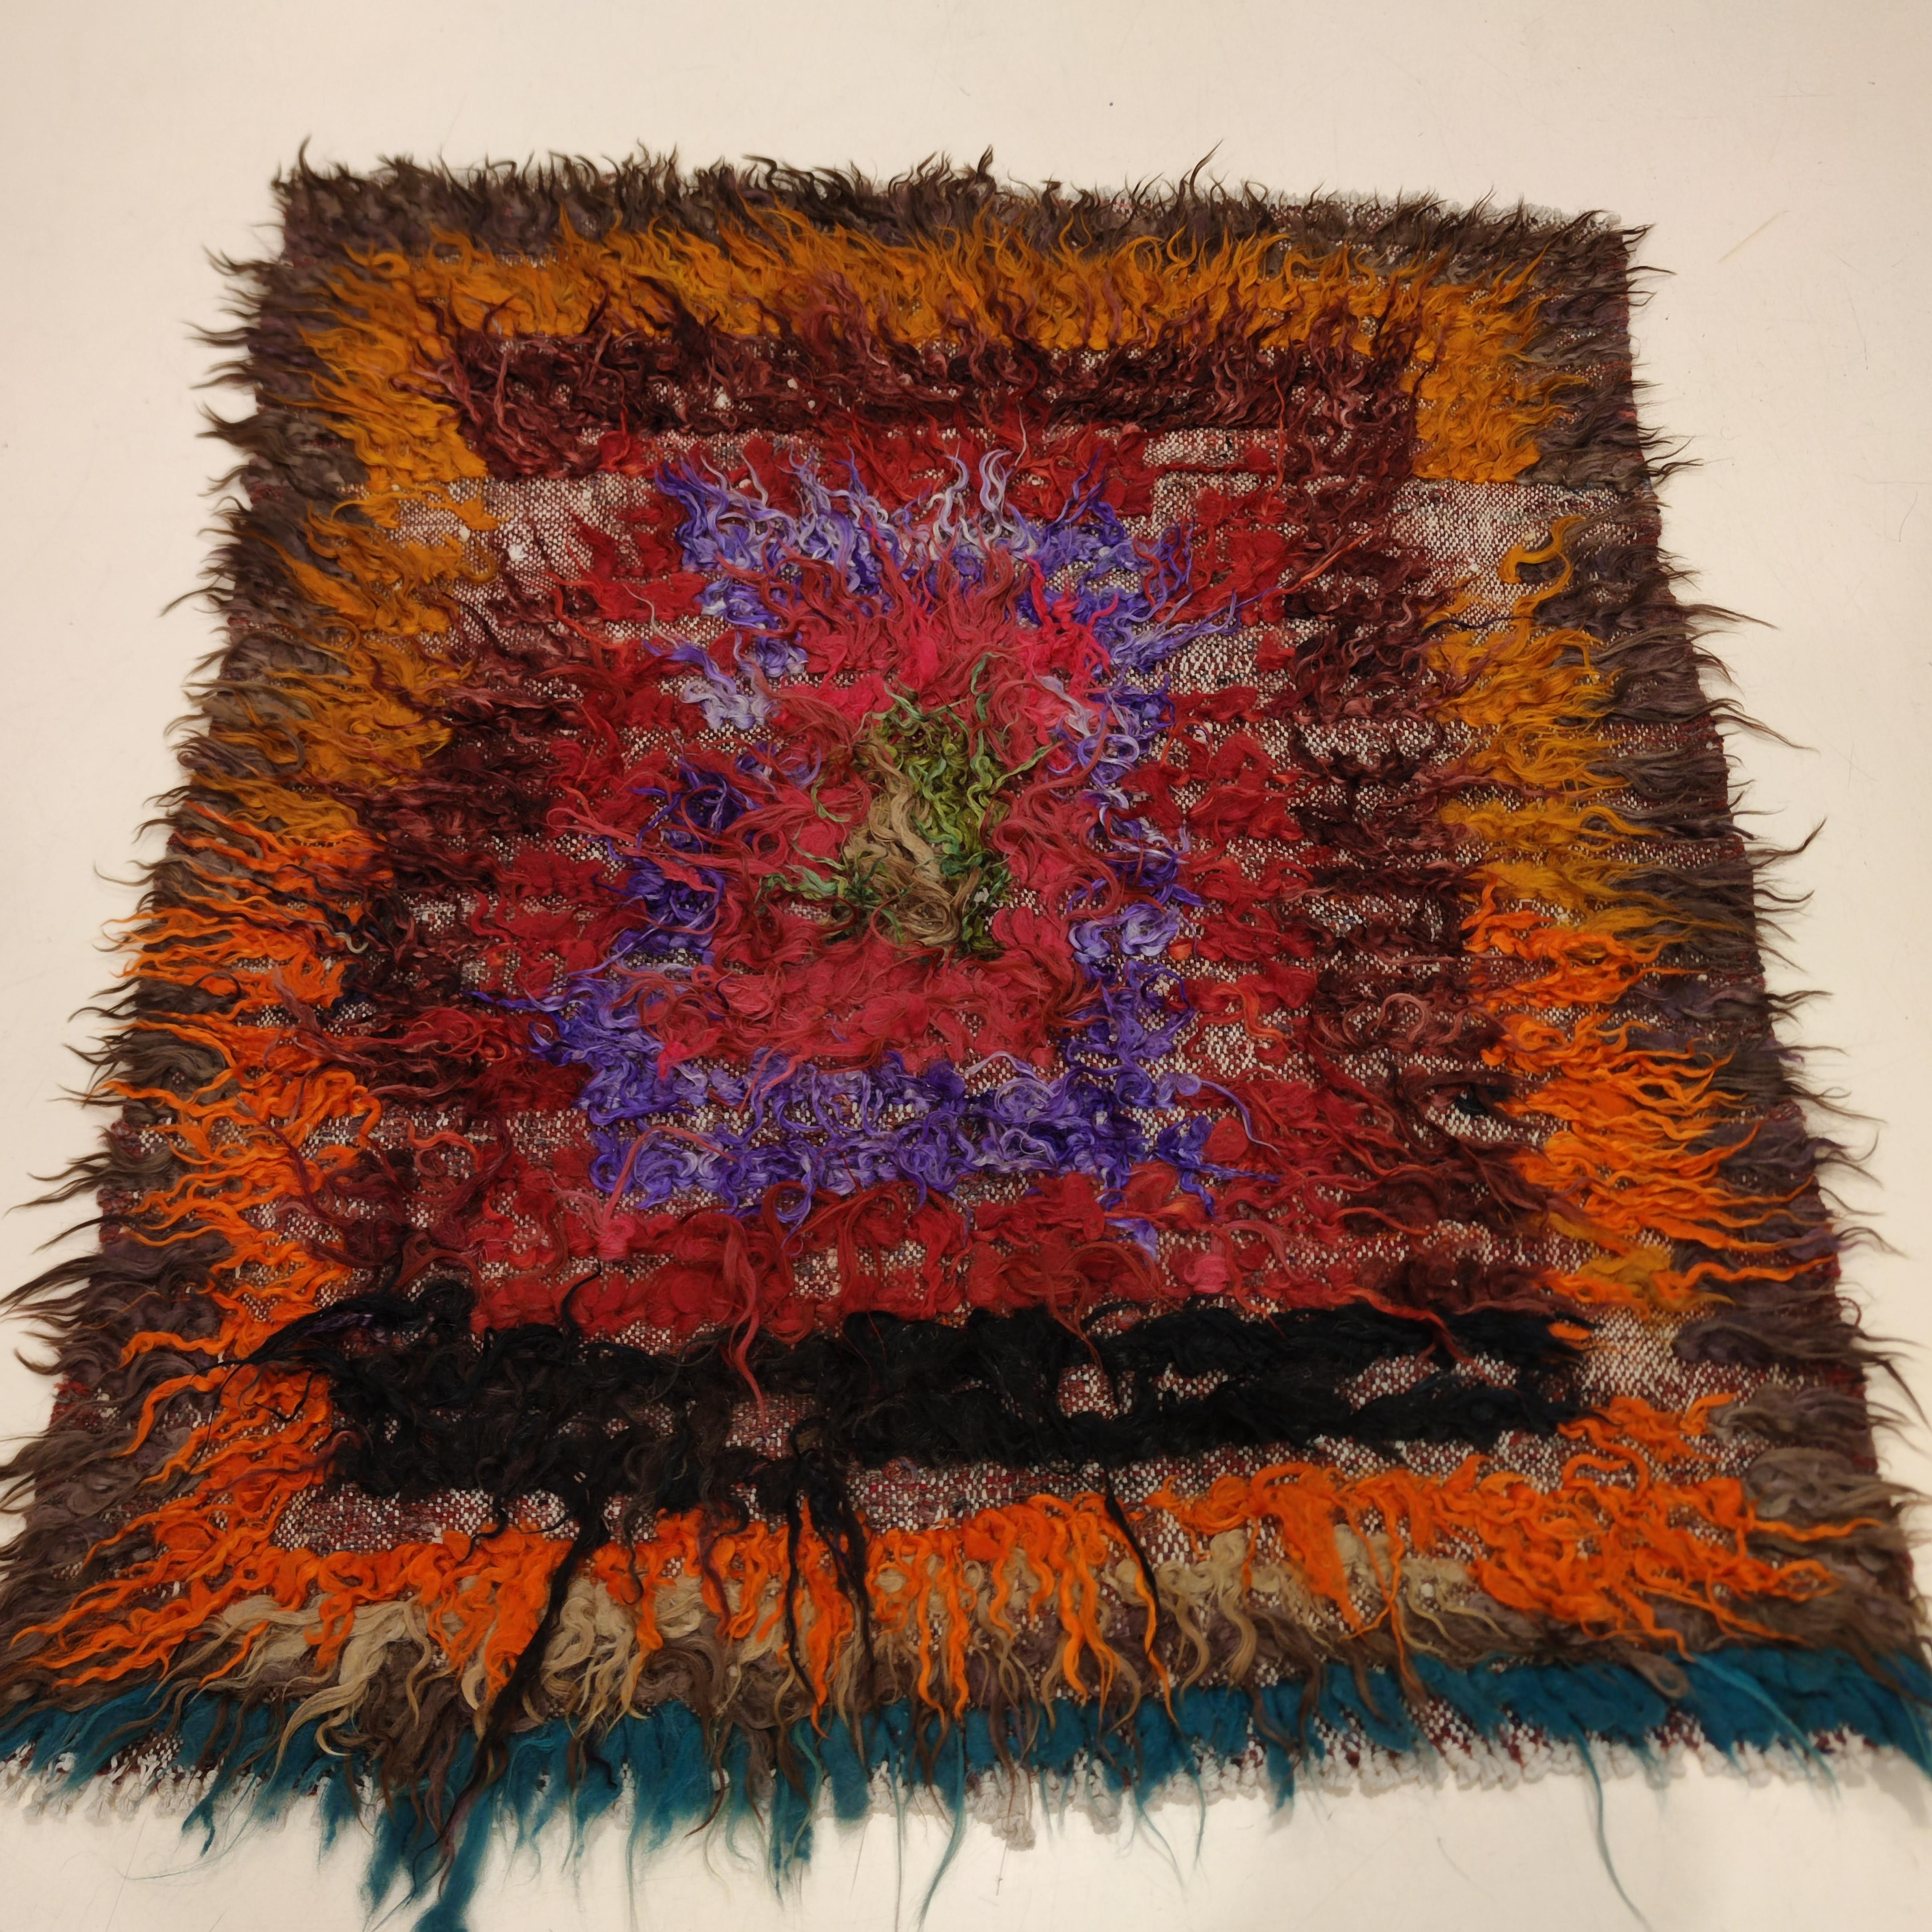 Filikli rugs represent probably the earliest, most primitive form of weaving known to mankind, veritably untouched over the course of a few thousand years. These were originally intended as a woven substitute to fur, hence the long fleecy pile.